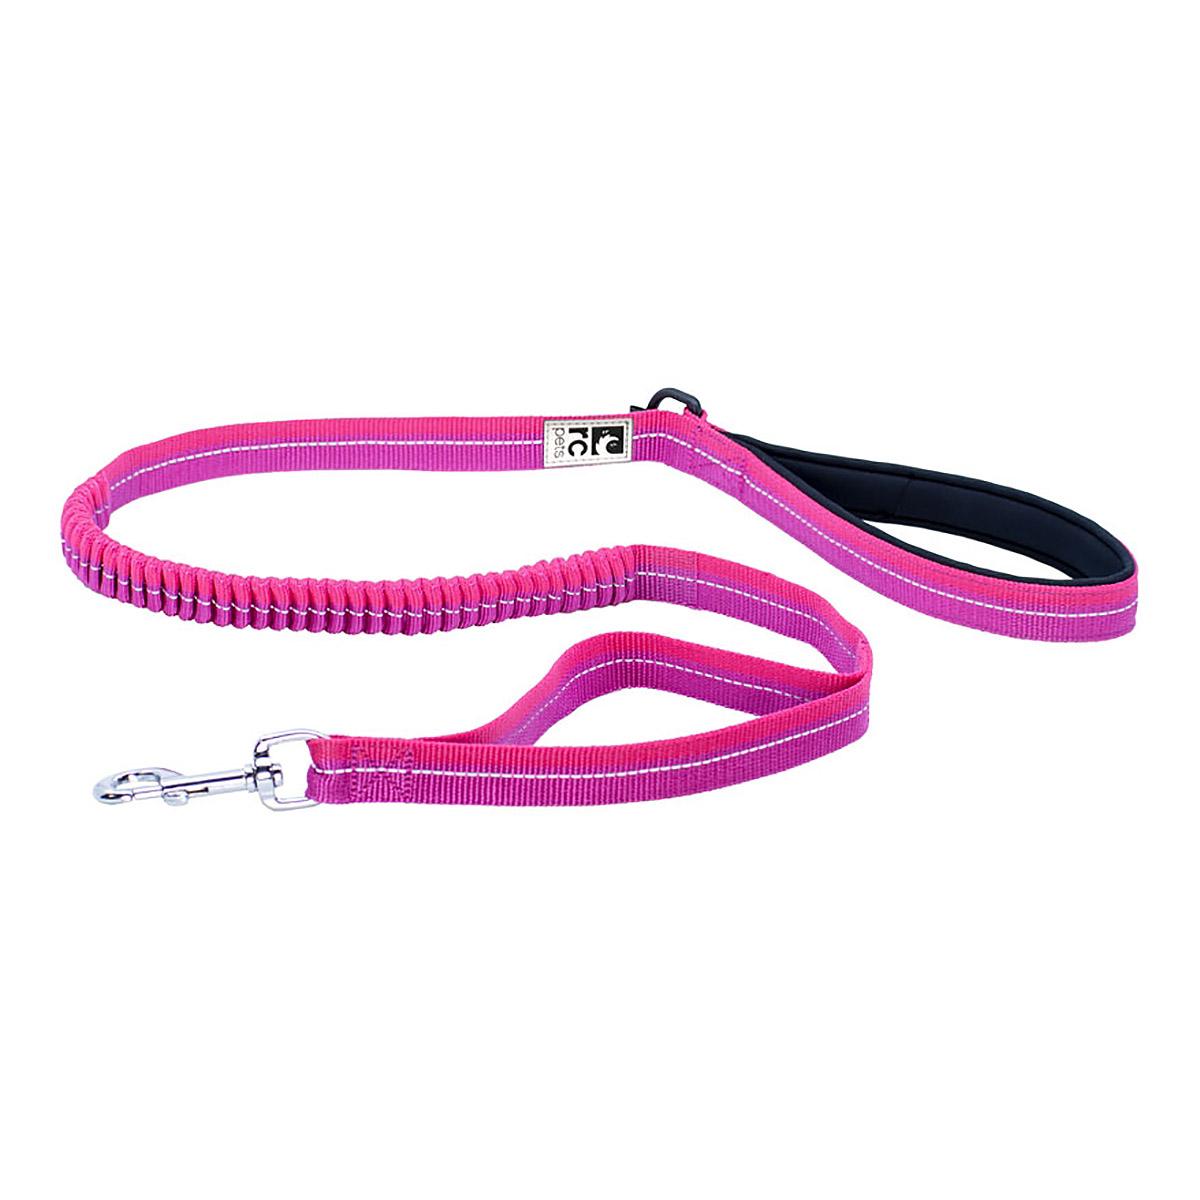 Bungee Traffic Dog Leash by RC Pets - Mulberry and Azalea